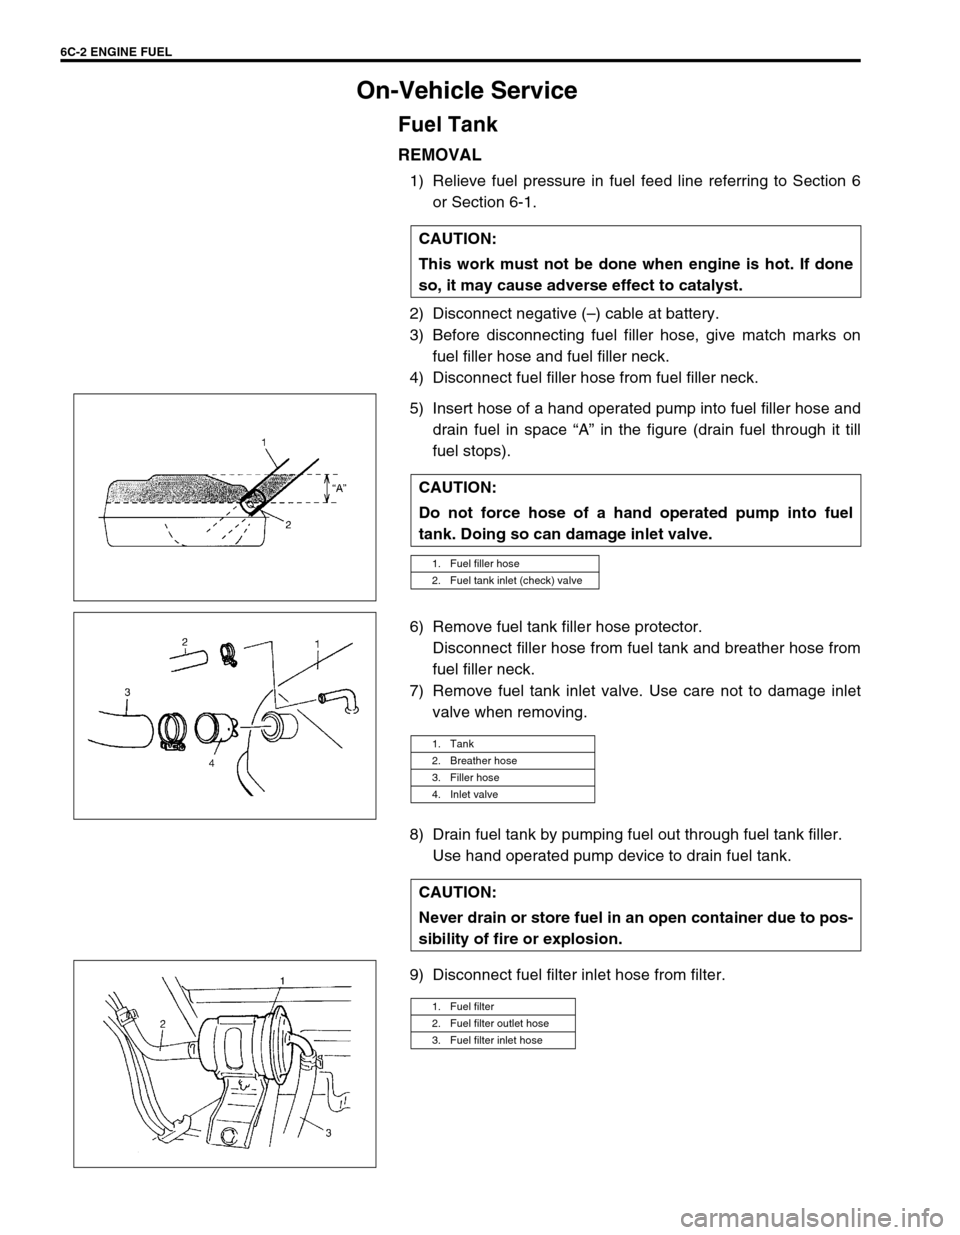 SUZUKI GRAND VITARA 2001 2.G Service Manual 6C-2 ENGINE FUEL
On-Vehicle Service
Fuel Tank
REMOVAL
1) Relieve fuel pressure in fuel feed line referring to Section 6
or Section 6-1.
2) Disconnect negative (–) cable at battery.
3) Before disconn